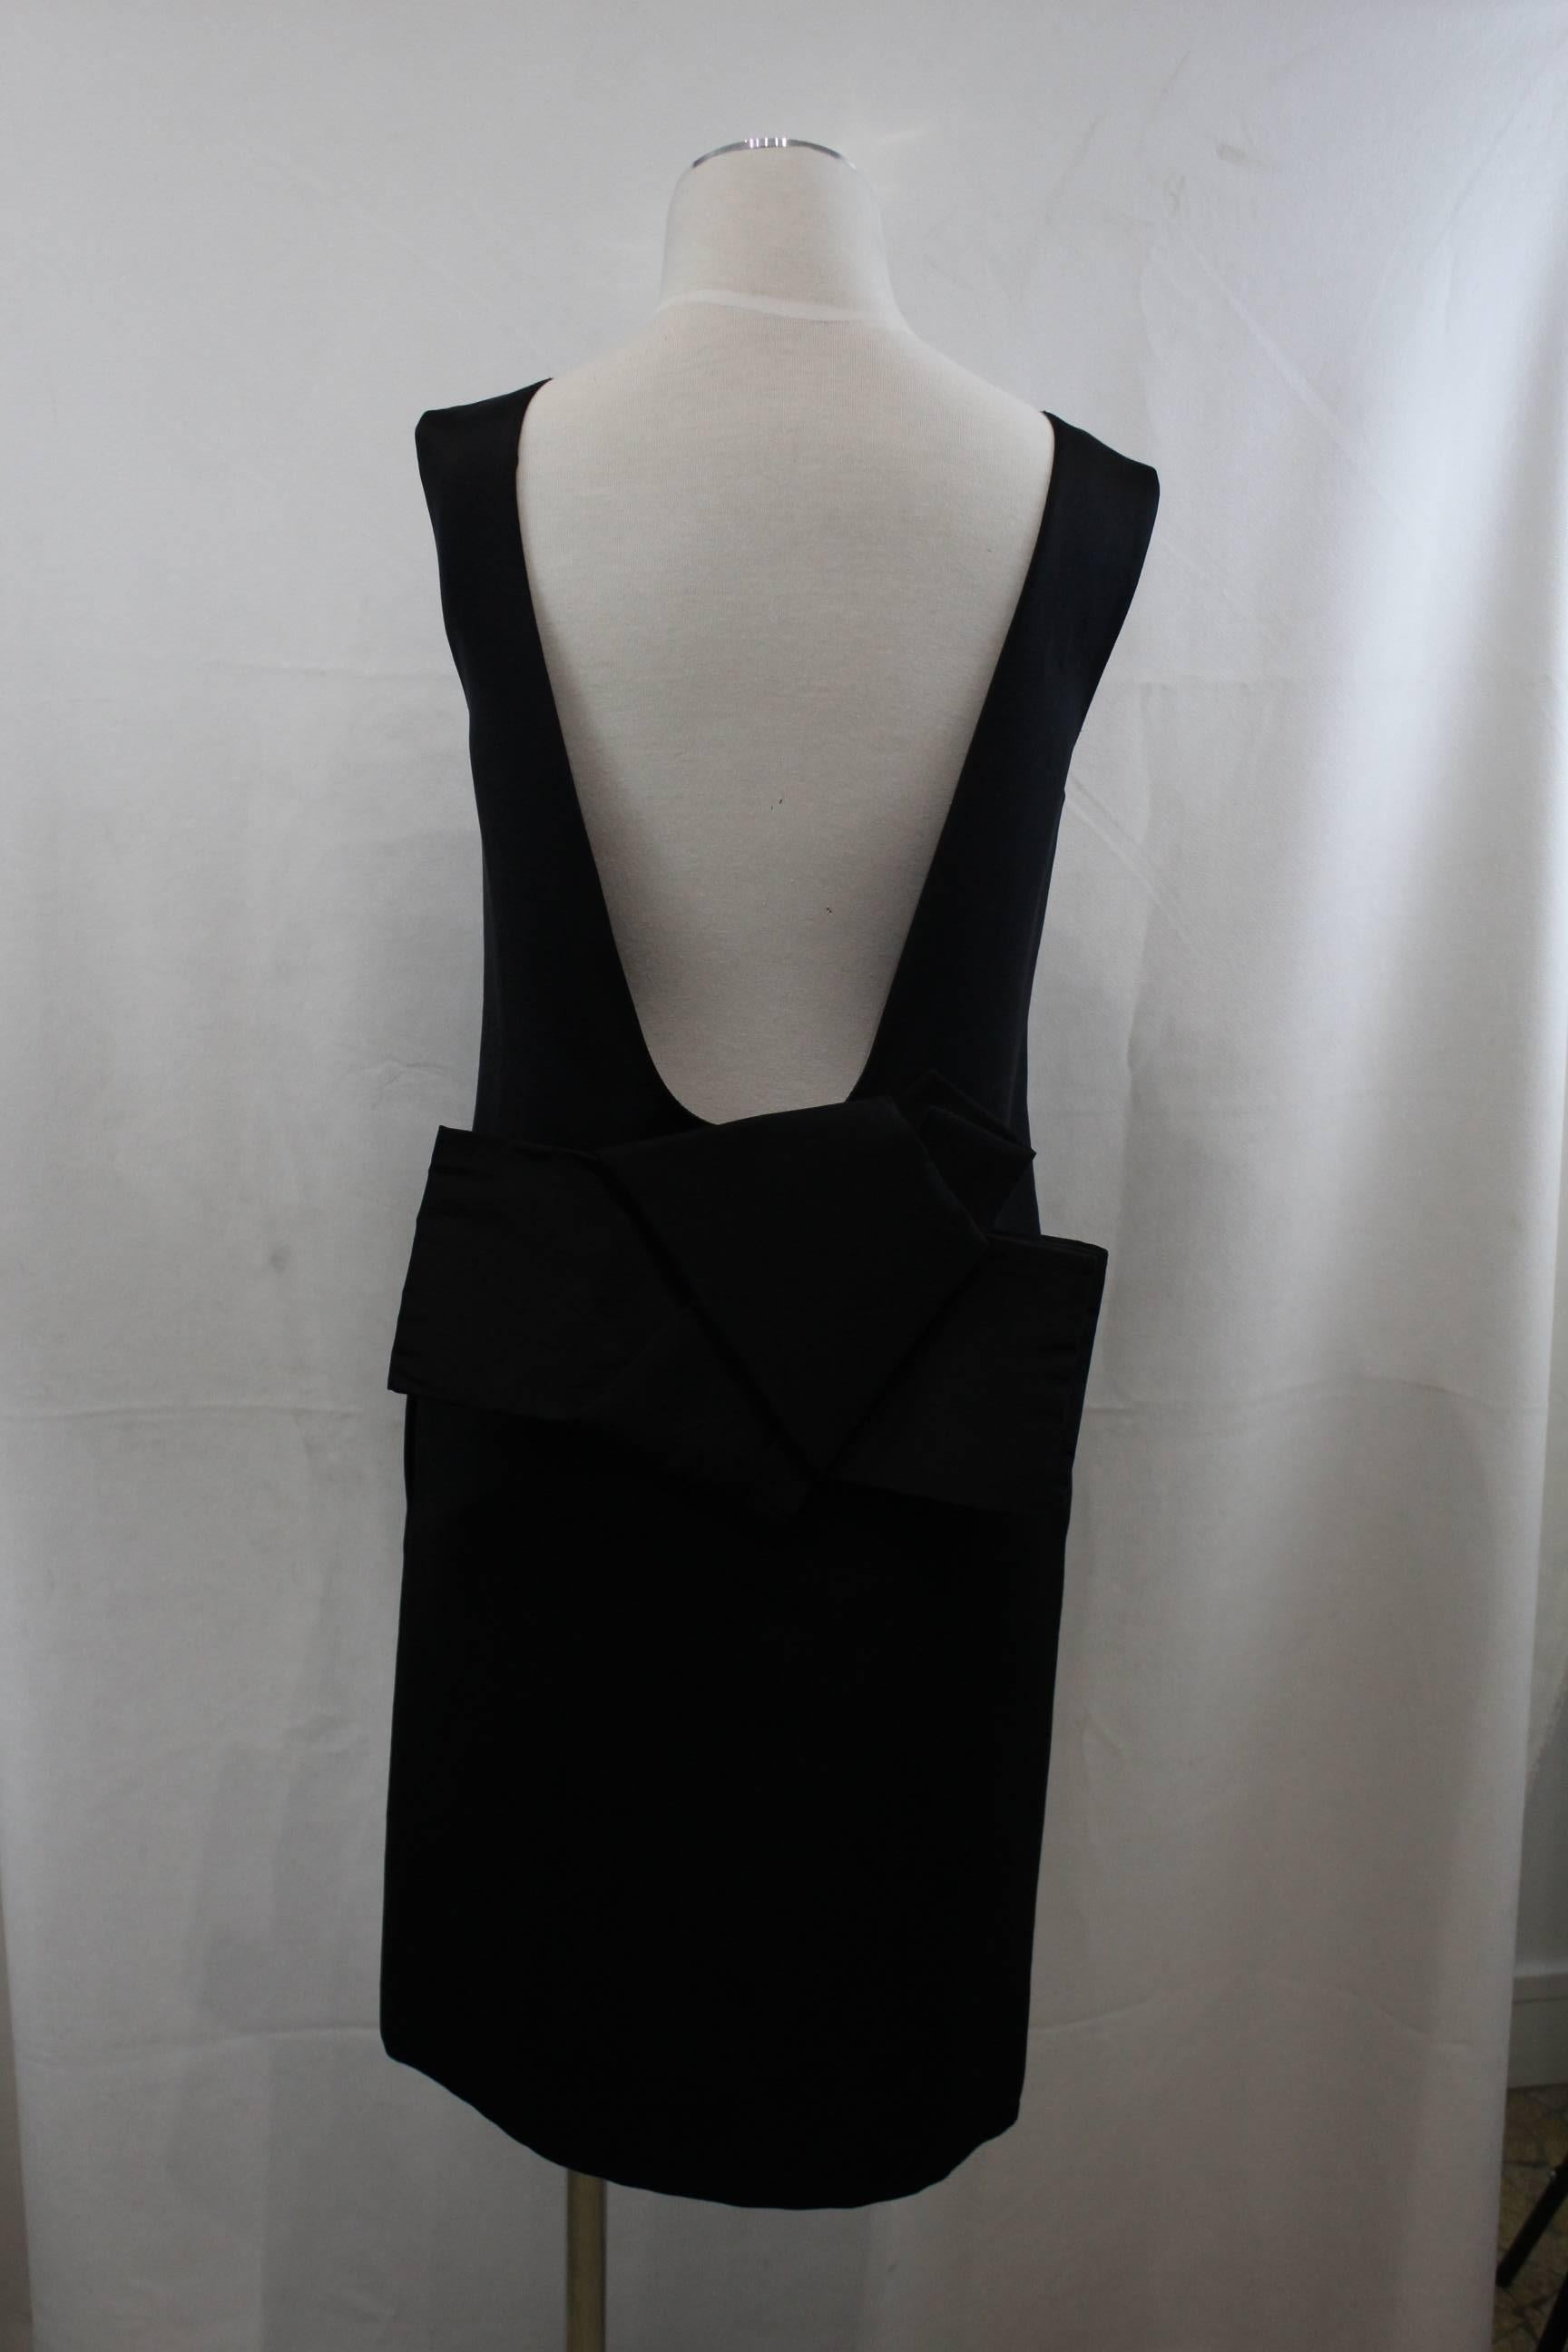 Awesome black cocktal dress from lanvin 2006 summer colelction.

Almost naked back with a maxi ribbon.

really god condition
